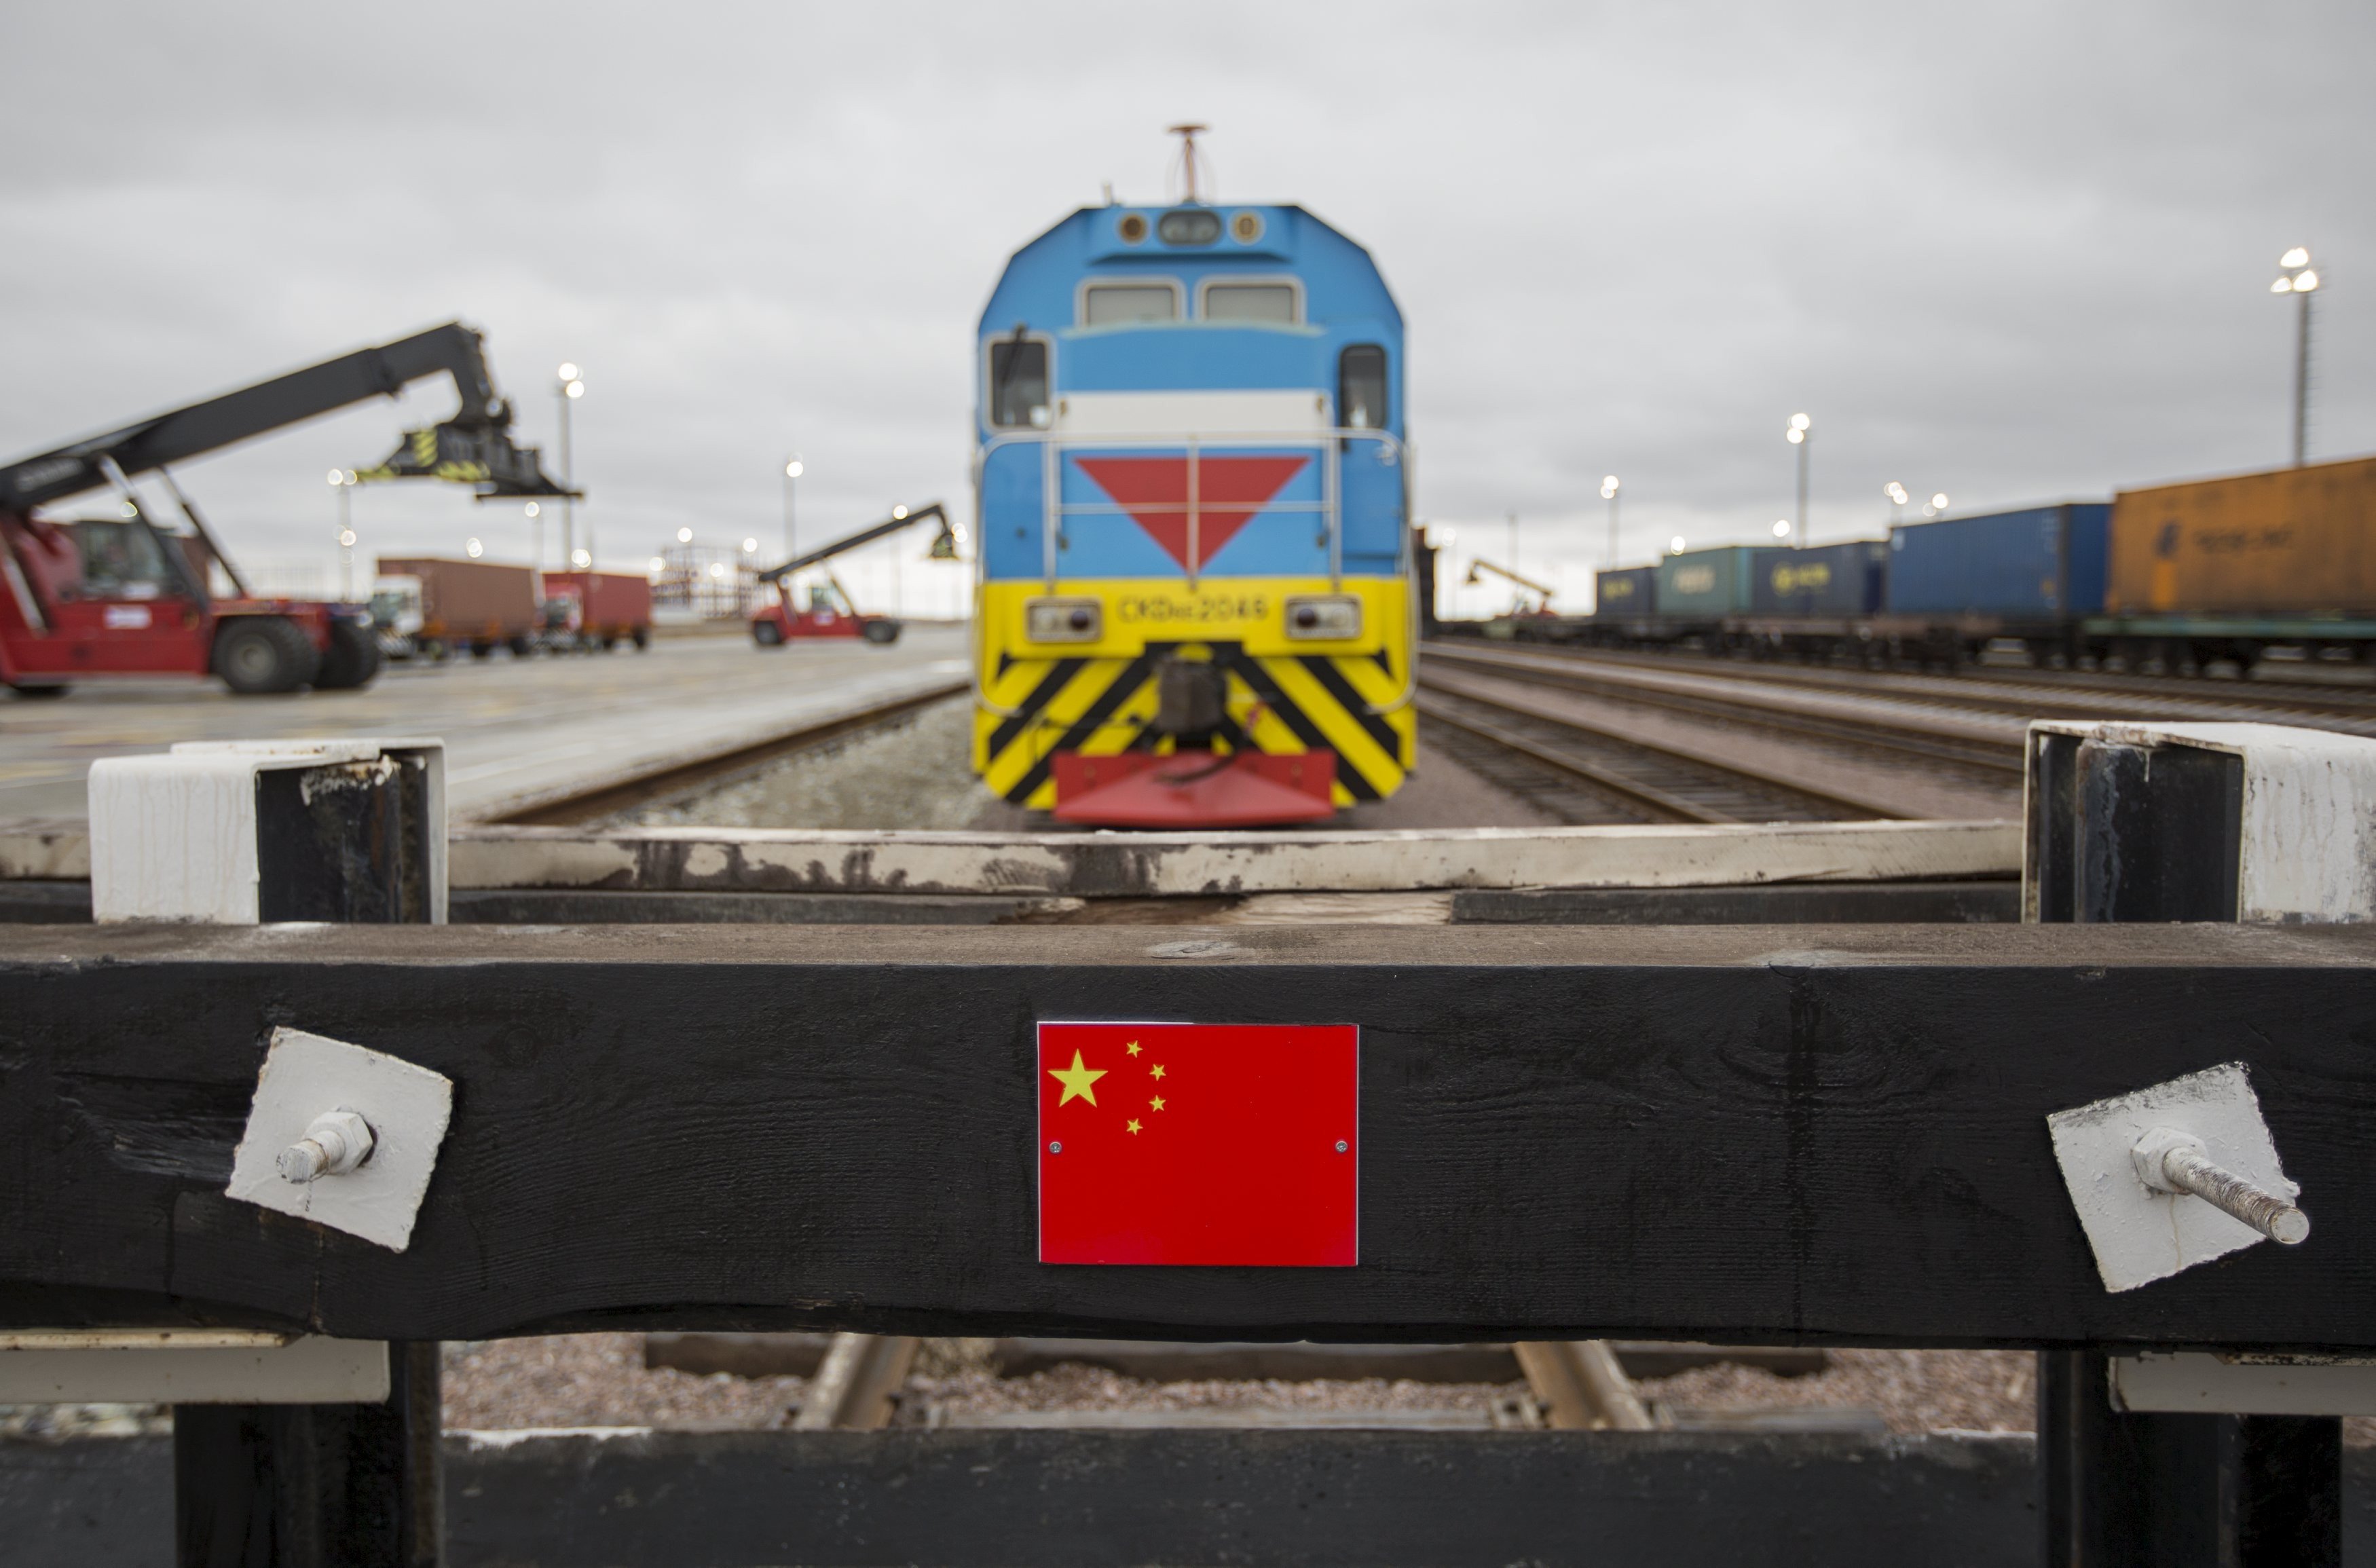 Beijing initiative helps Chinese companies explore markets along ancient Silk Road trade route